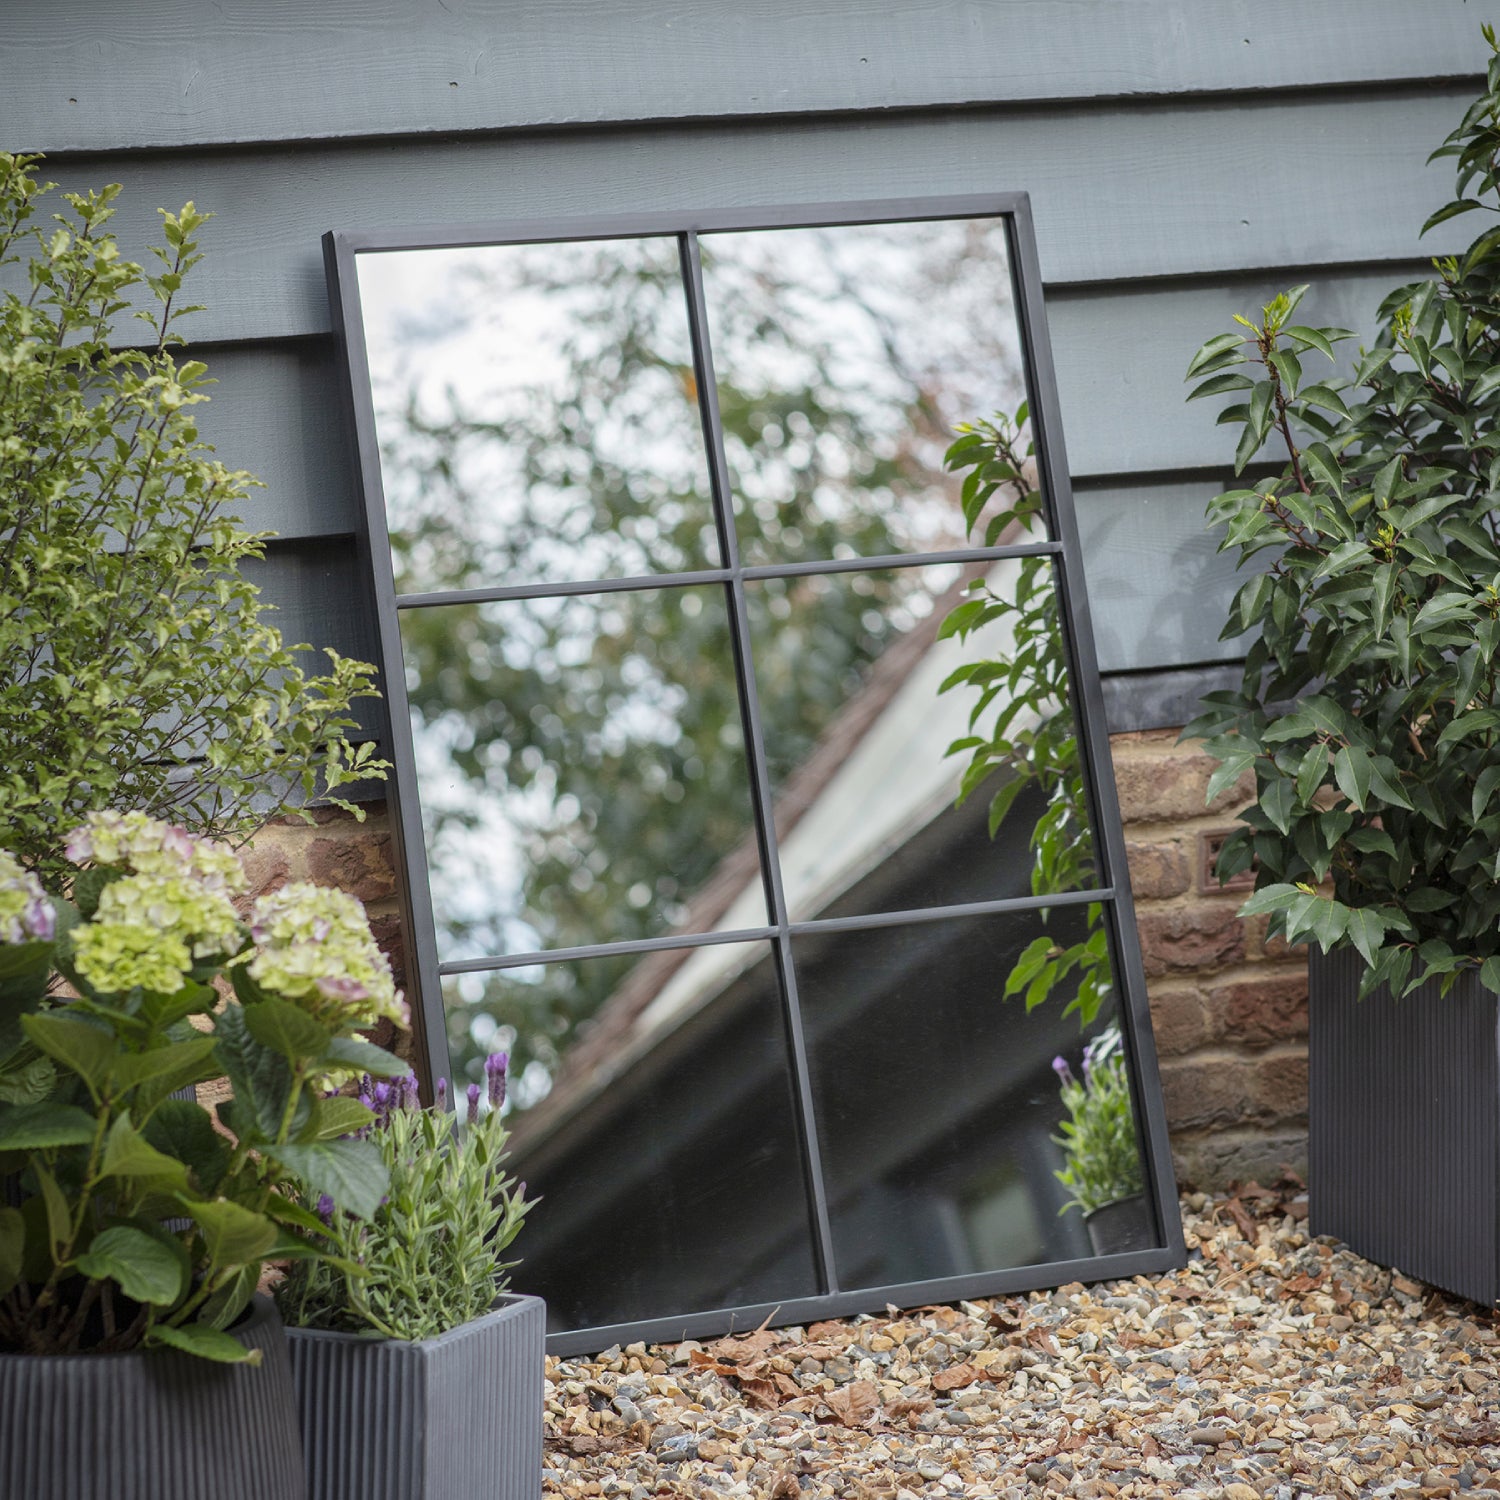 Fulbrook Wall Mirror in 100 x 70cm by Garden Trading